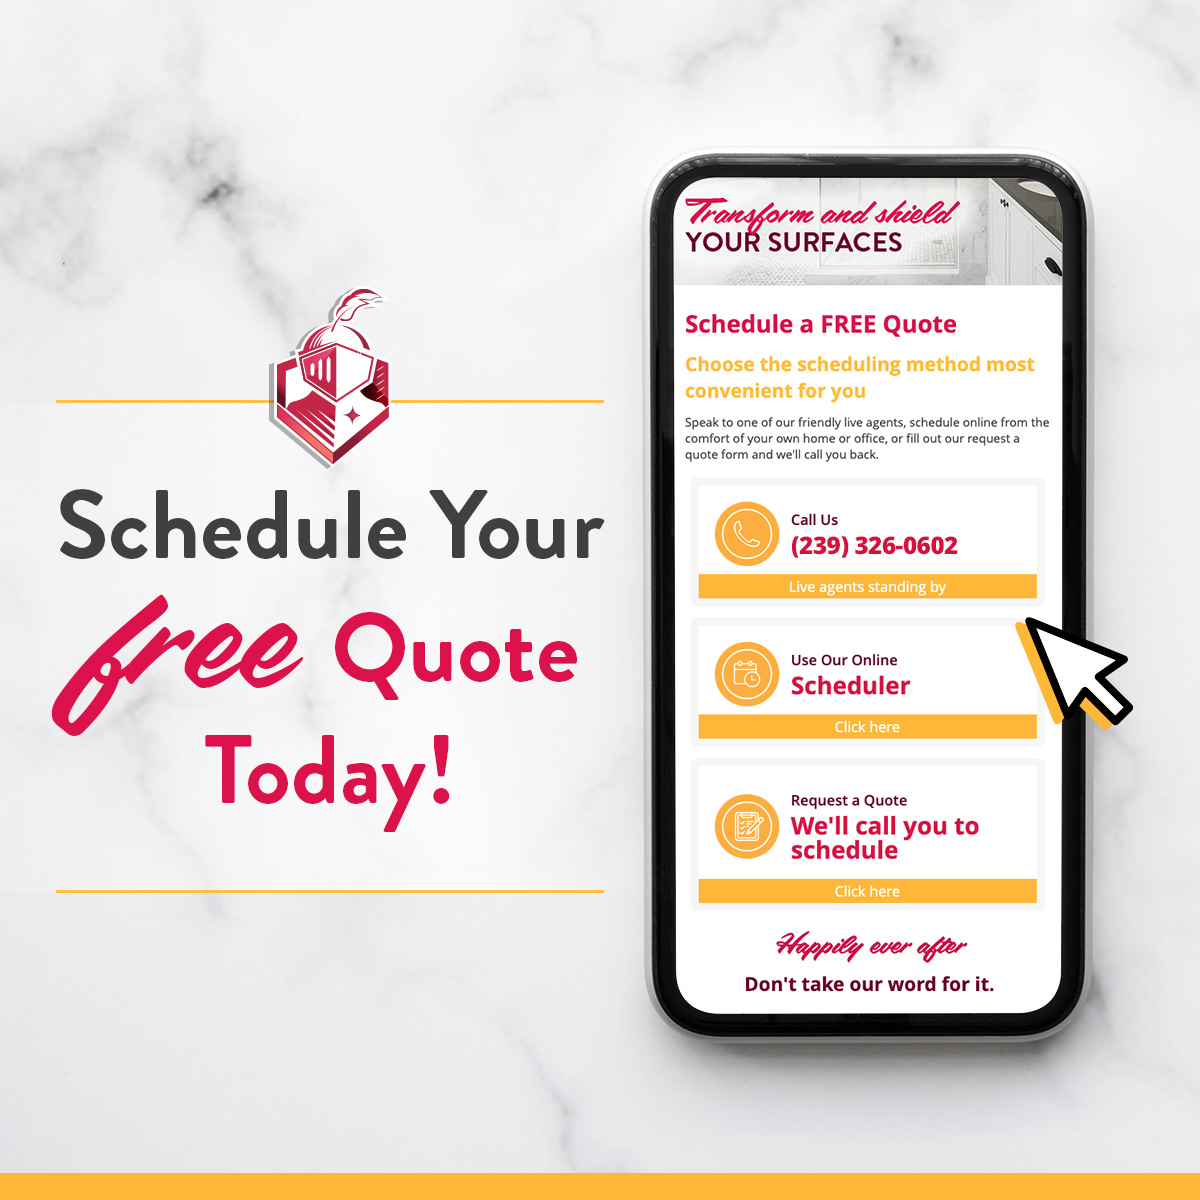 Schedule your Free Quote Today!